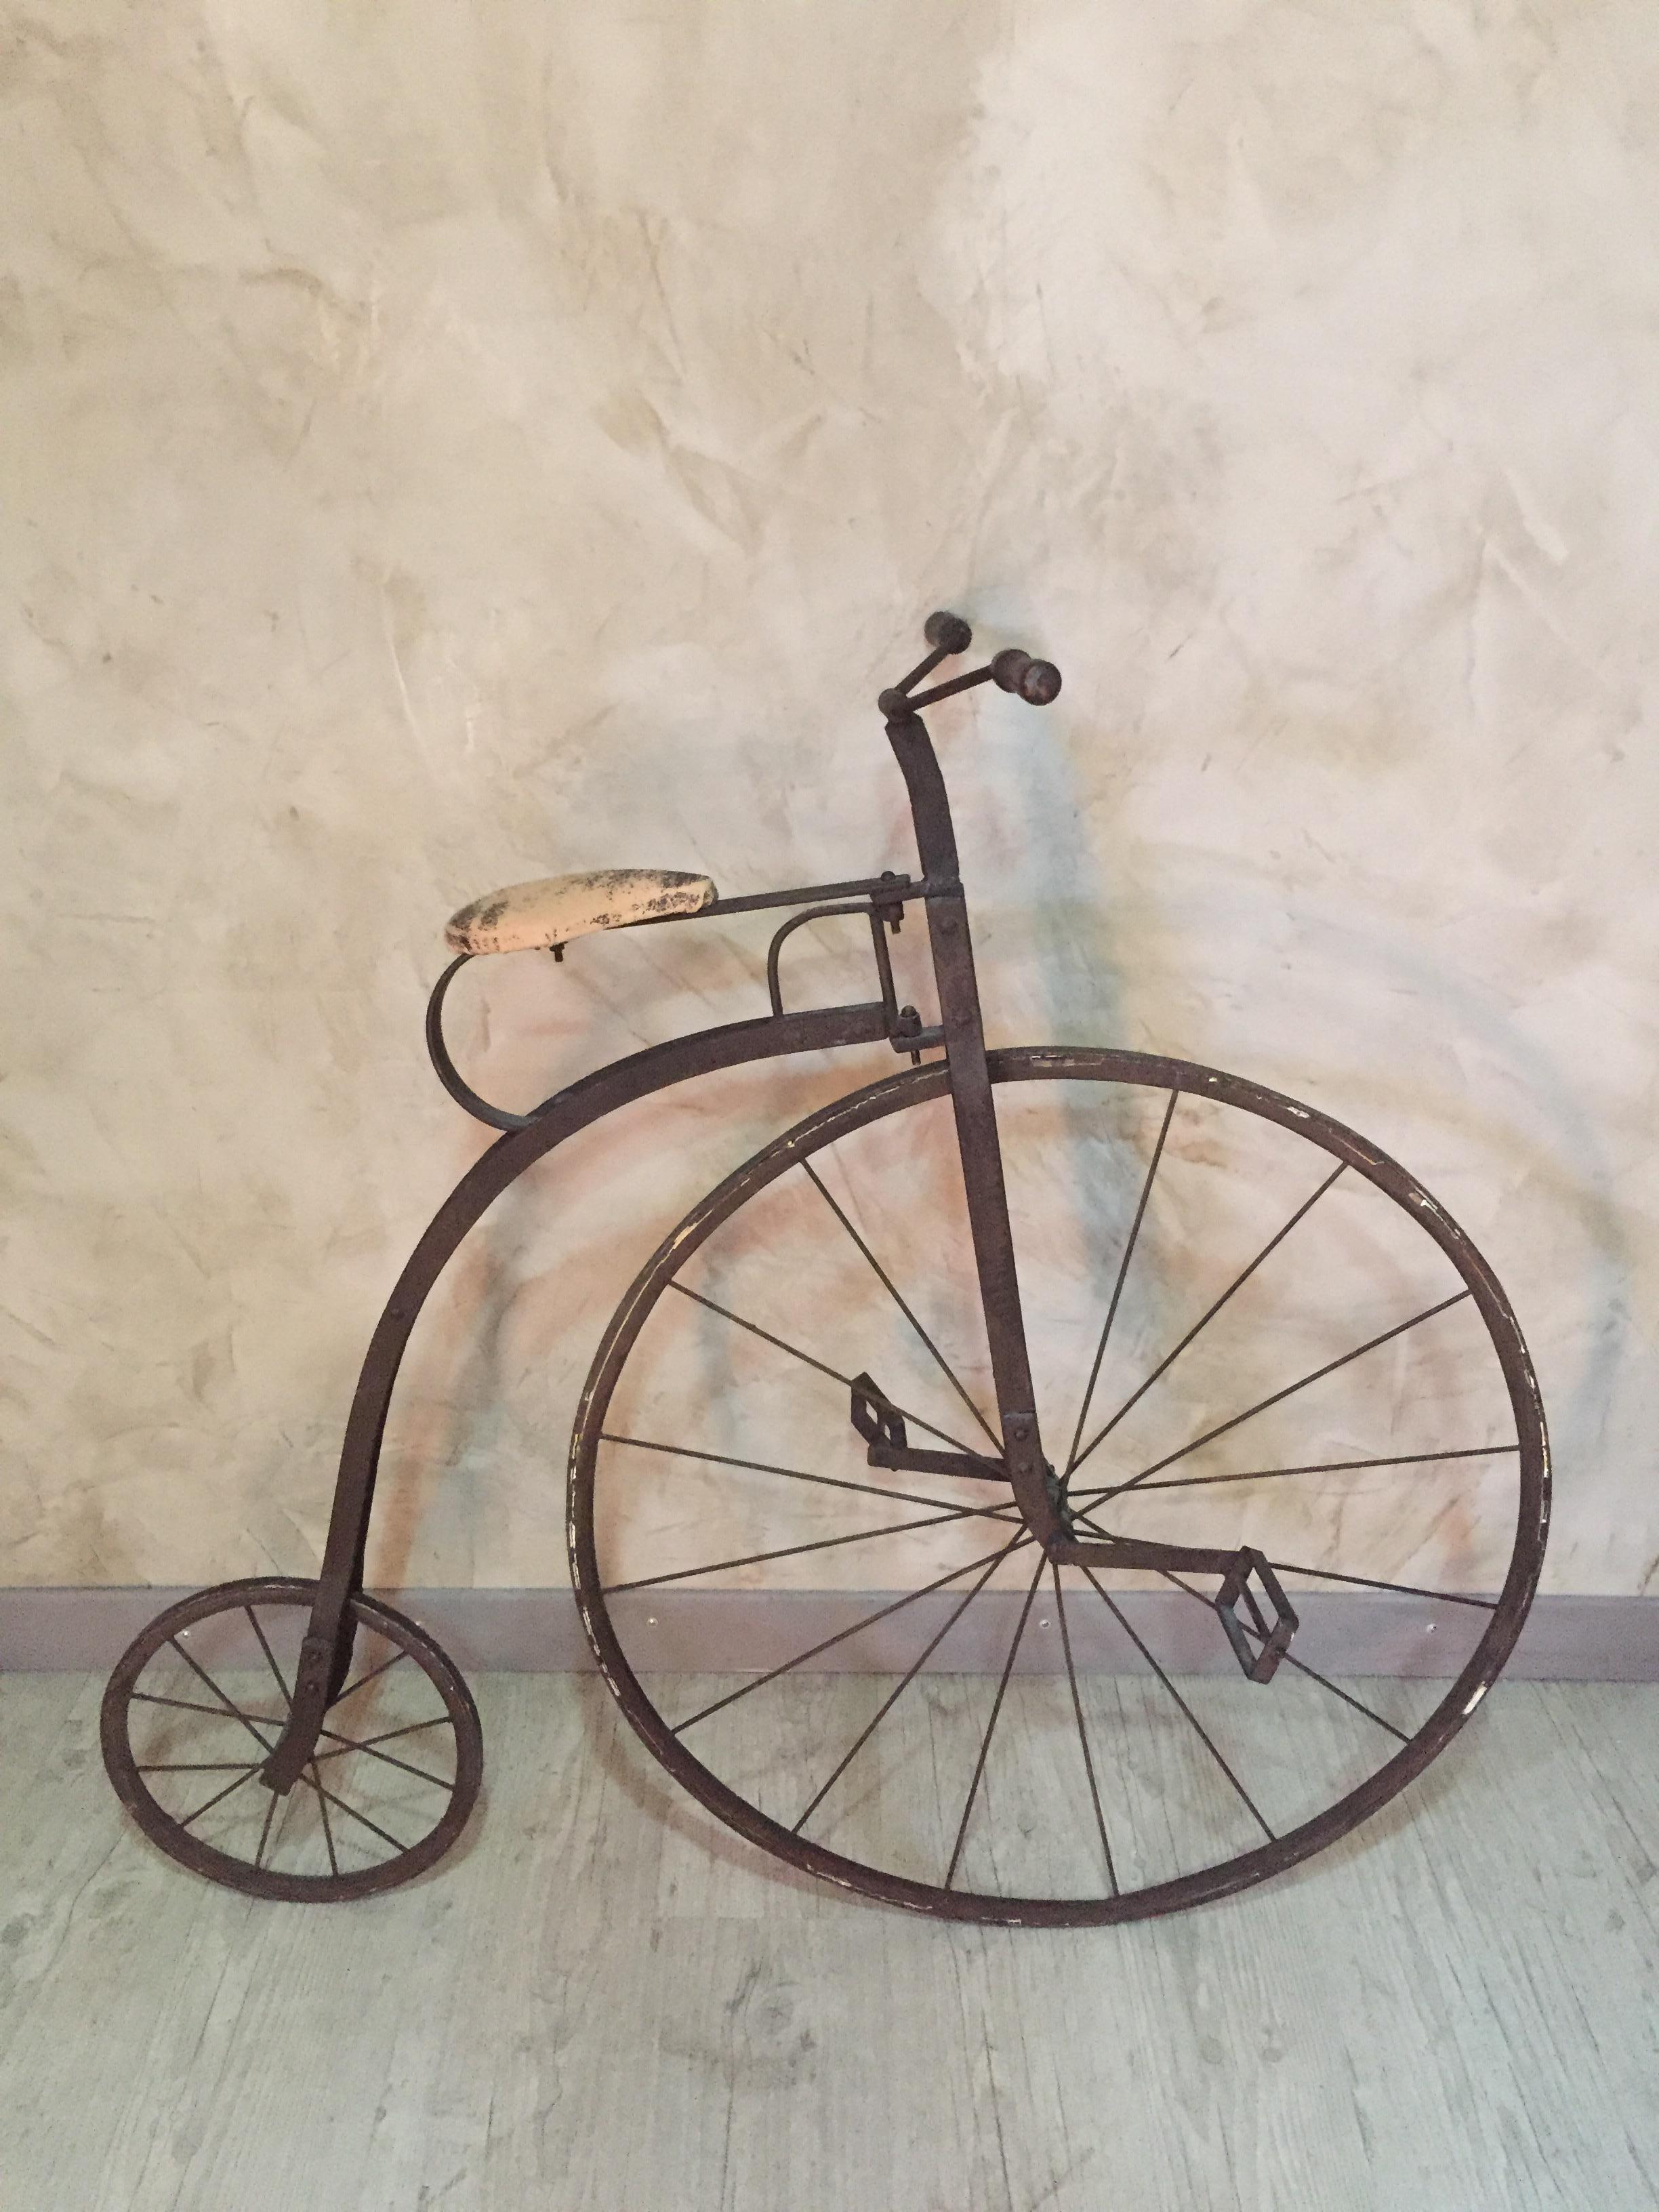 Extremely rare piece!!!!

Antique child high Wheeler bicycle called 